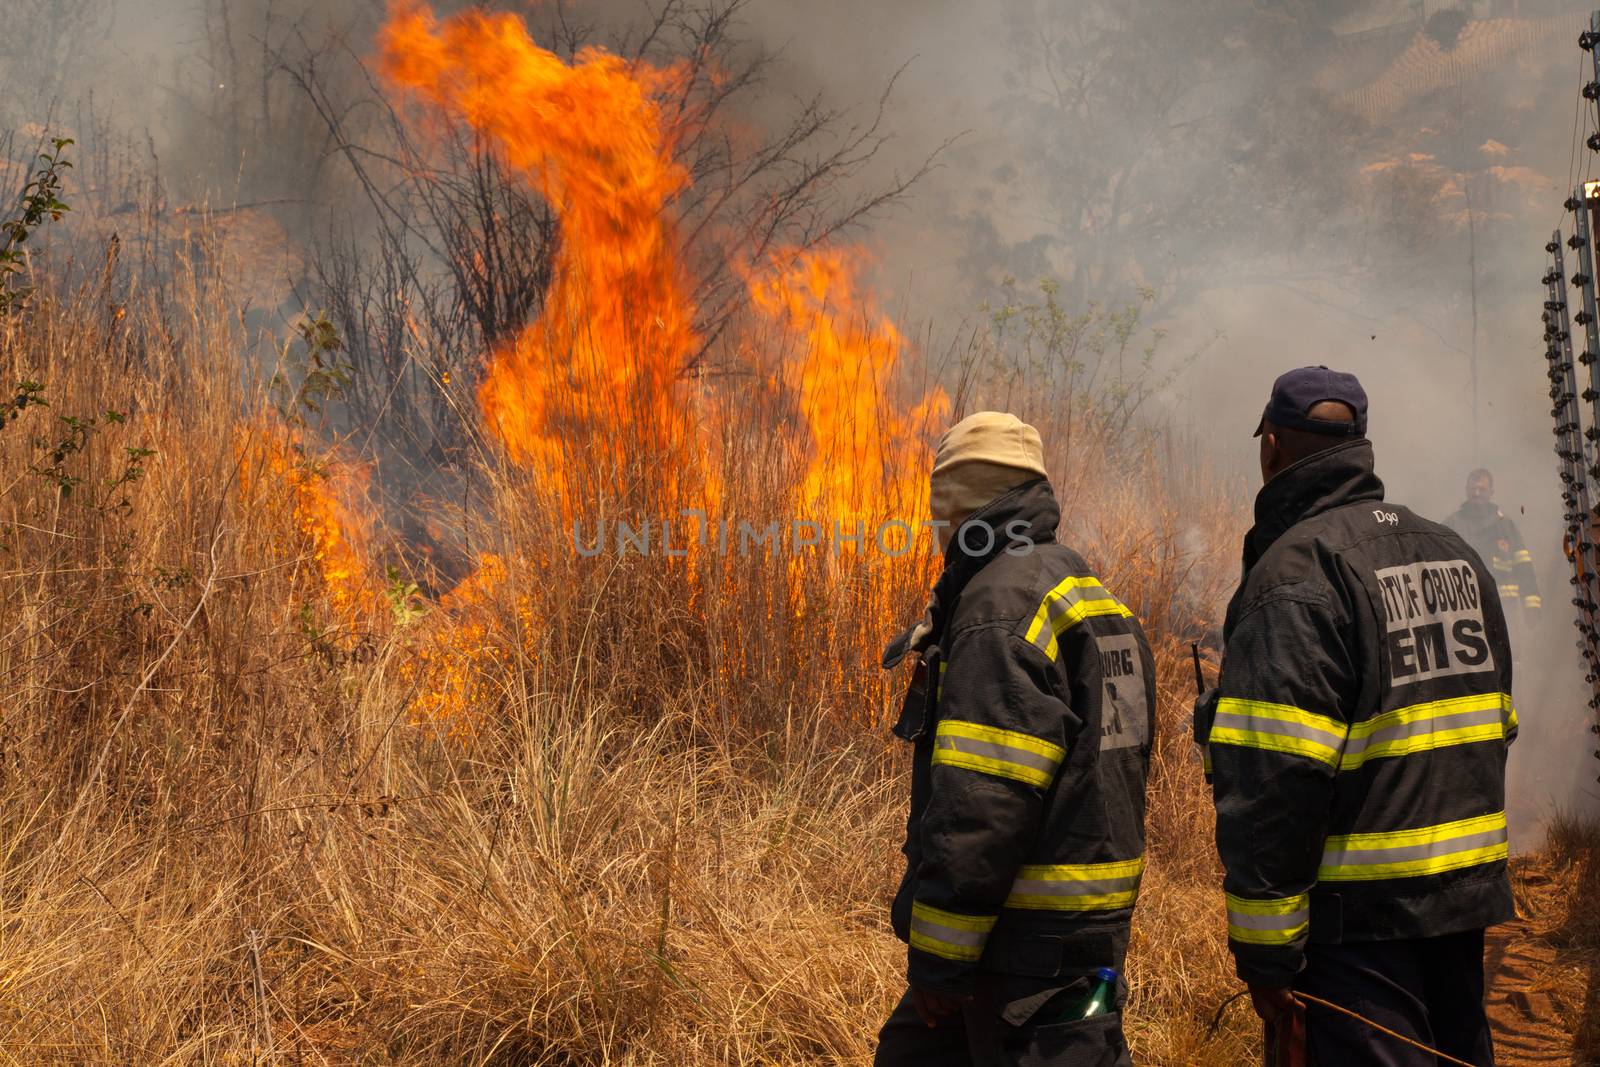 Fire fighters attending to a brush fire in Johannesburg.